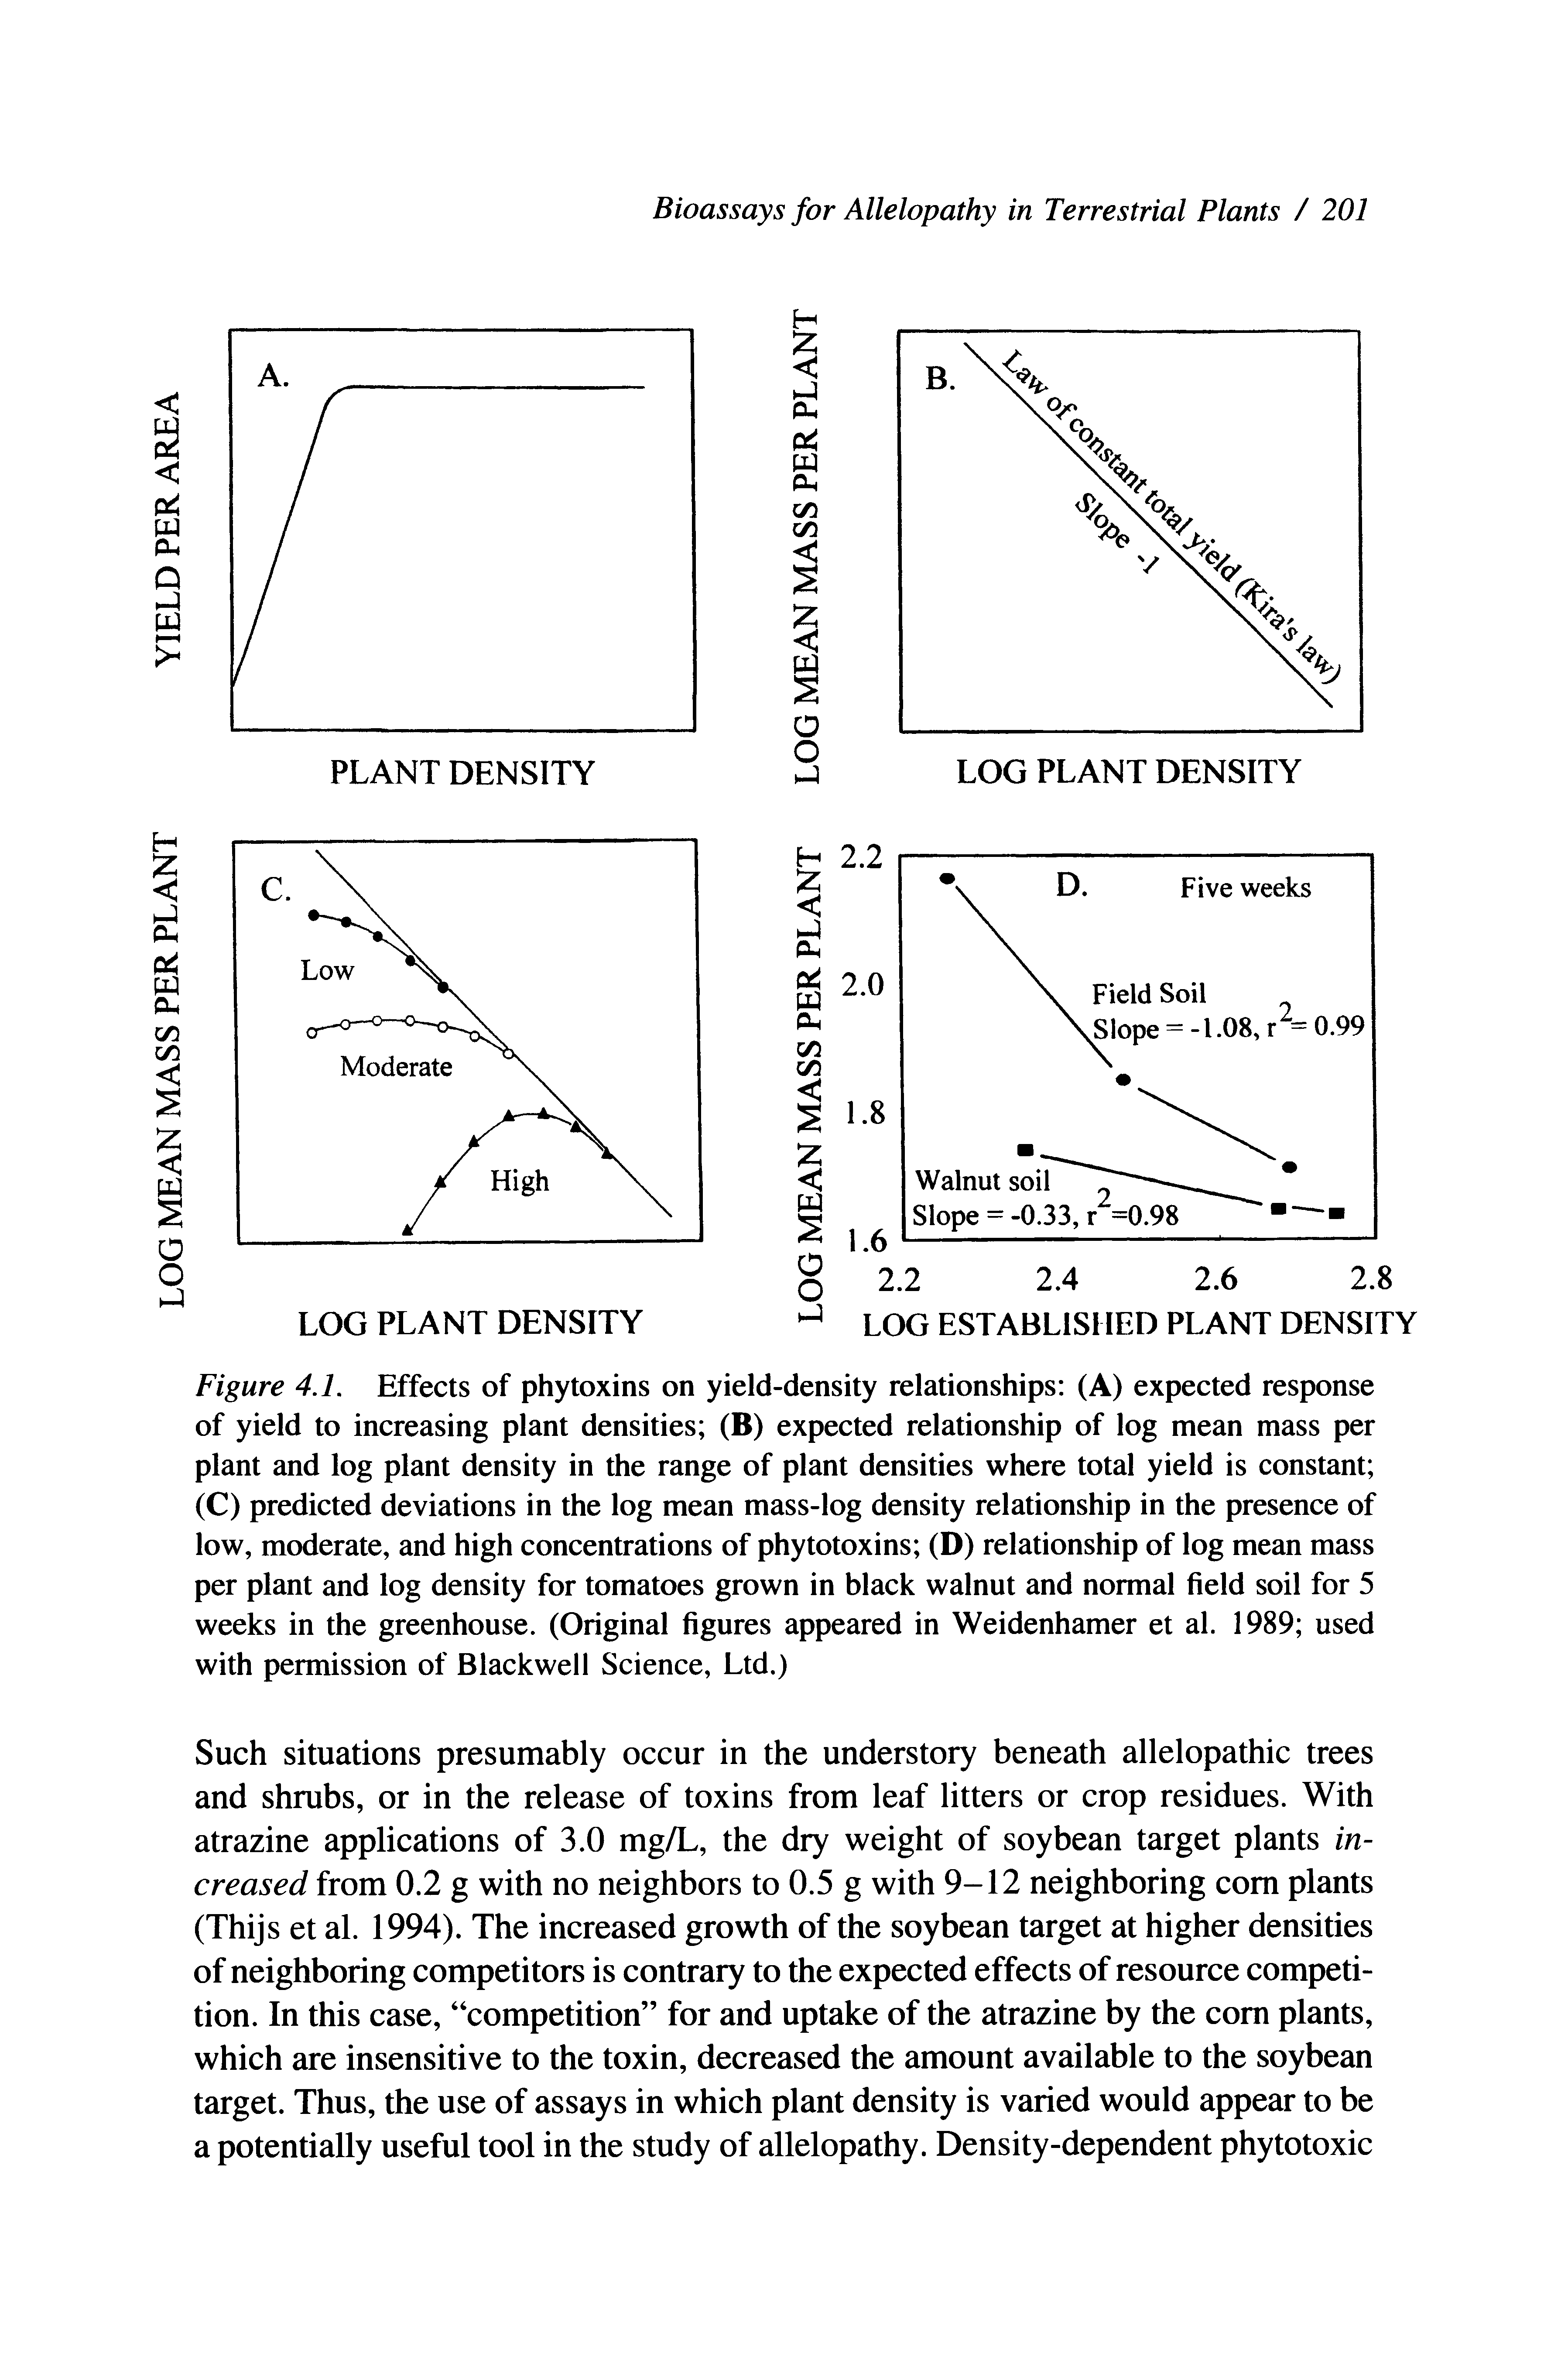 Figure 4.1. Effects of phytoxins on yield-density relationships (A) expected response of yield to increasing plant densities (B) expected relationship of log mean mass per plant and log plant density in the range of plant densities where total yield is constant (C) predicted deviations in the log mean mass-log density relationship in the presence of low, moderate, and high concentrations of phytotoxins (D) relationship of log mean mass per plant and log density for tomatoes grown in black walnut and normal field soil for 5 weeks in the greenhouse. (Original figures appeared in Weidenhamer et al. 1989 used with permission of Blackwell Science, Ltd.)...